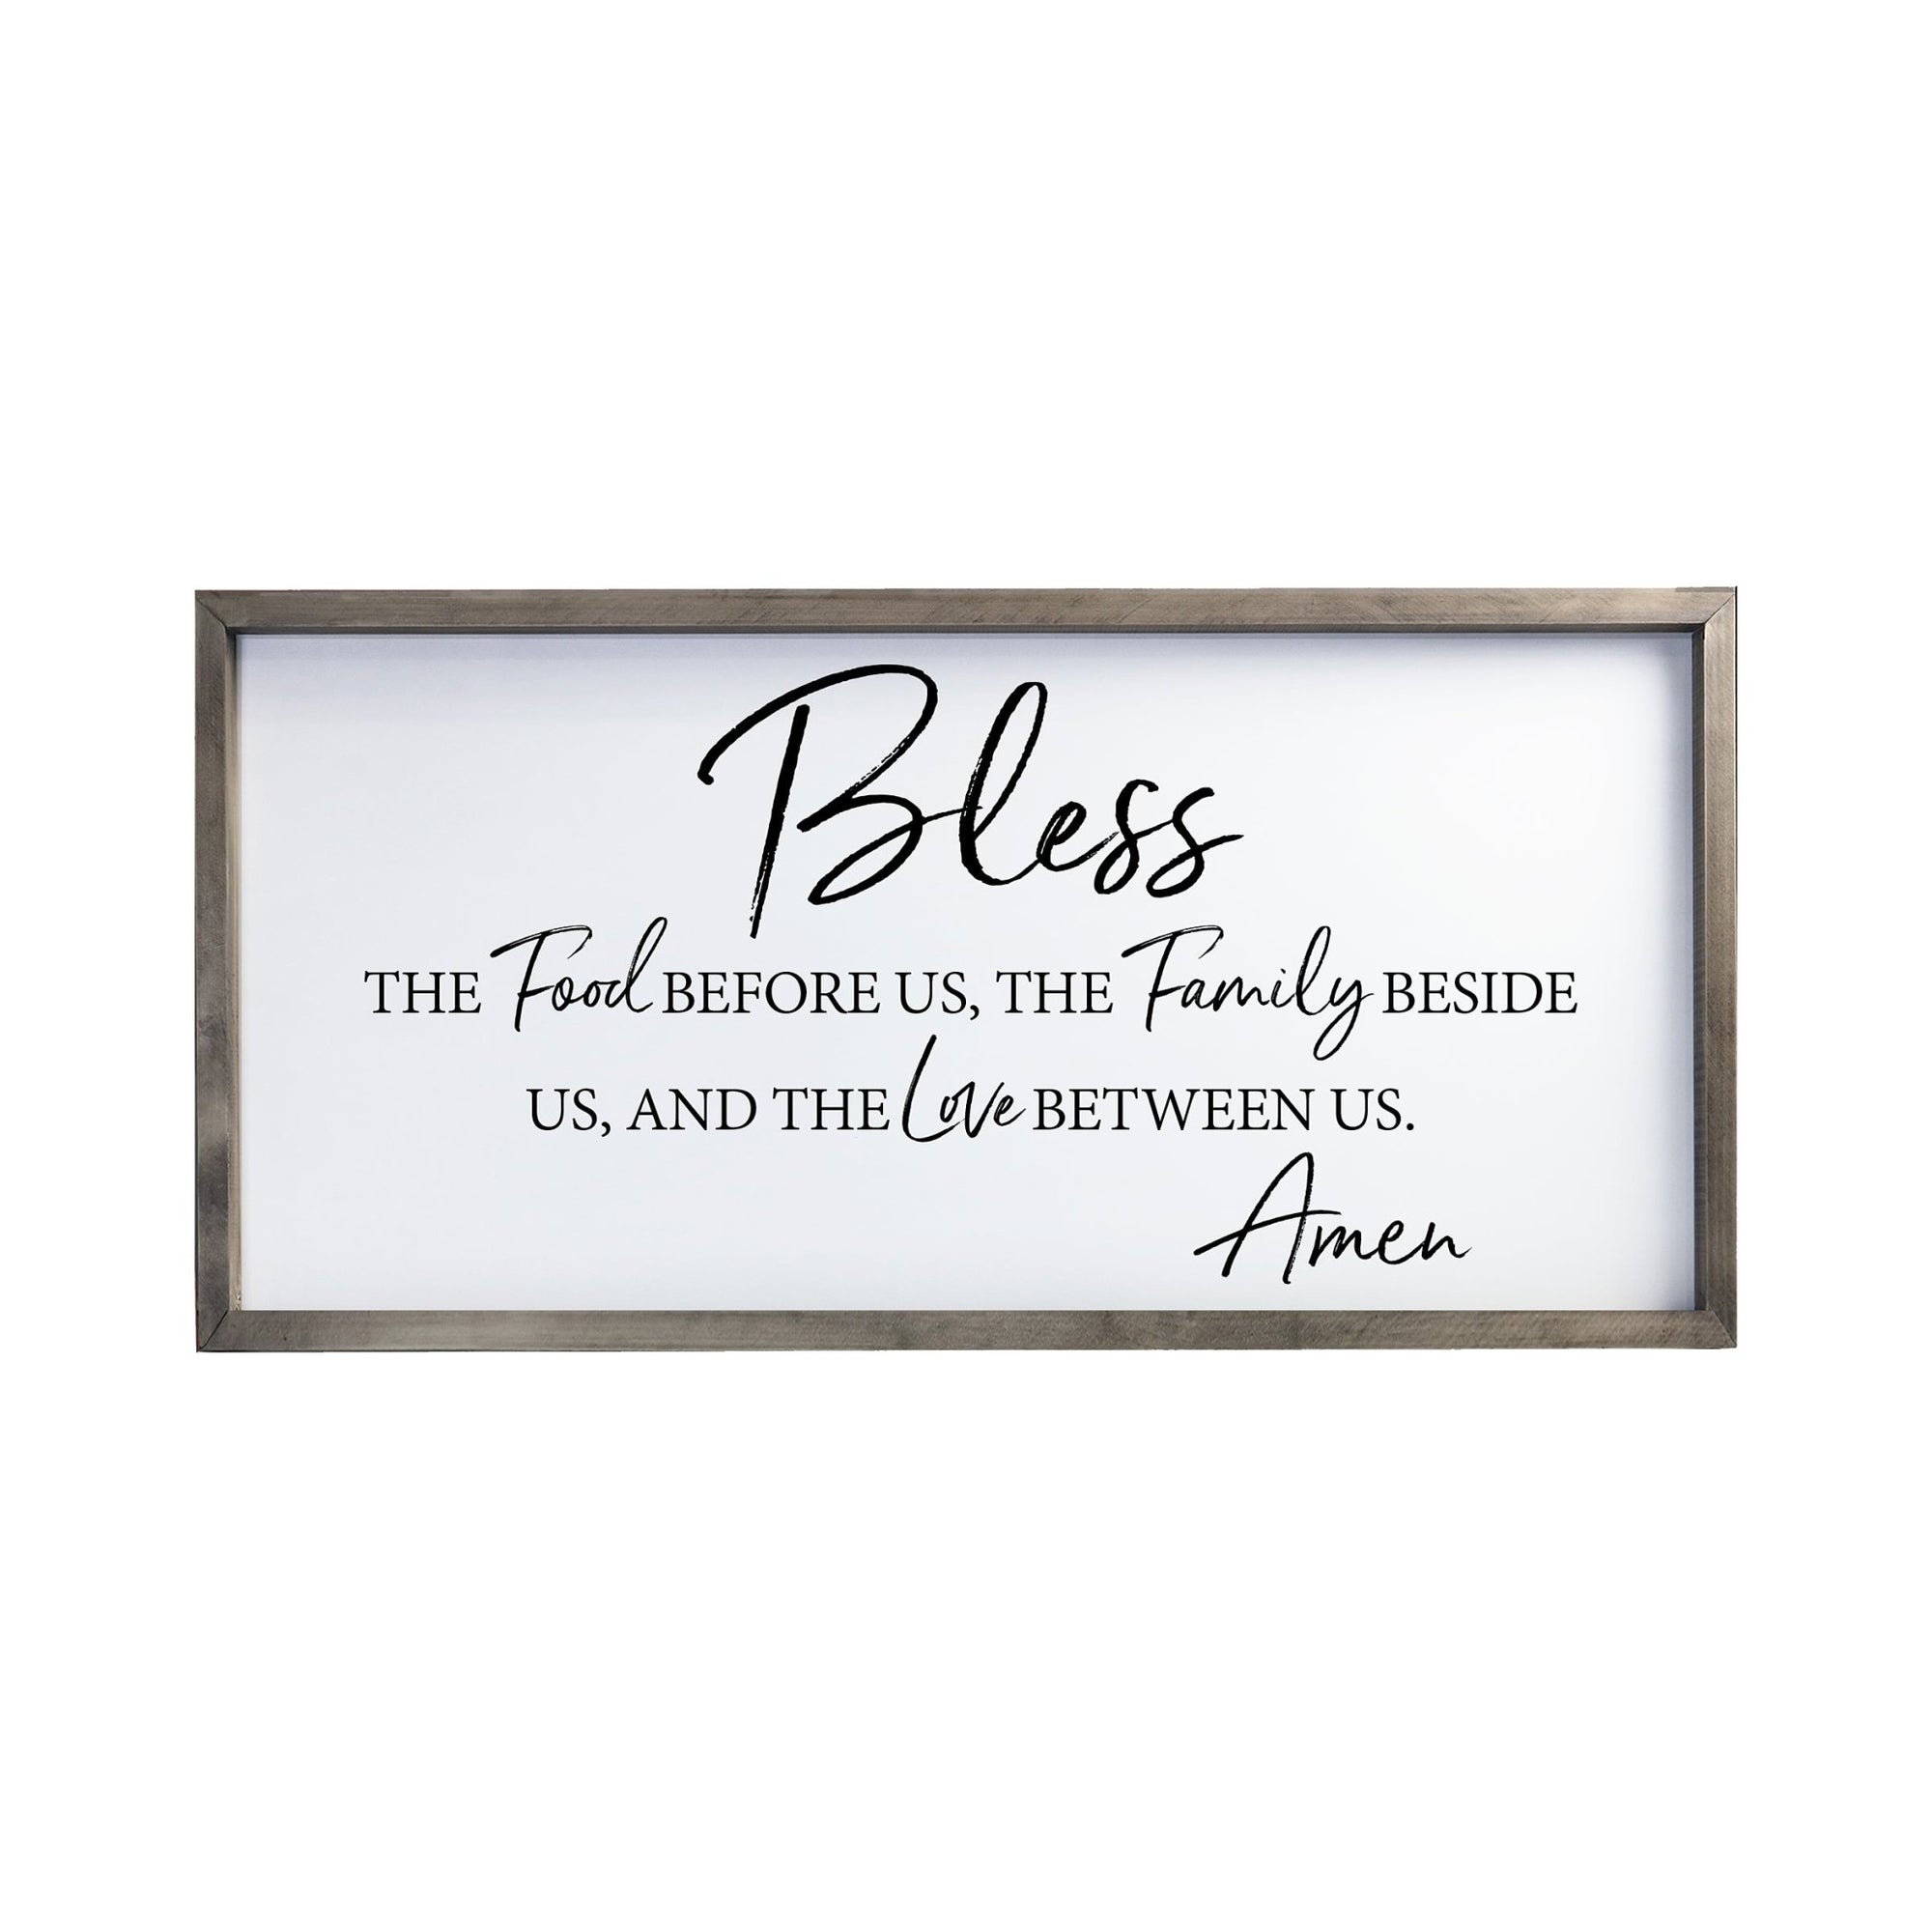 Large Family Wall Decor Quote Sign For Home 18 x 36 - Bless The Food Before Us - LifeSong Milestones